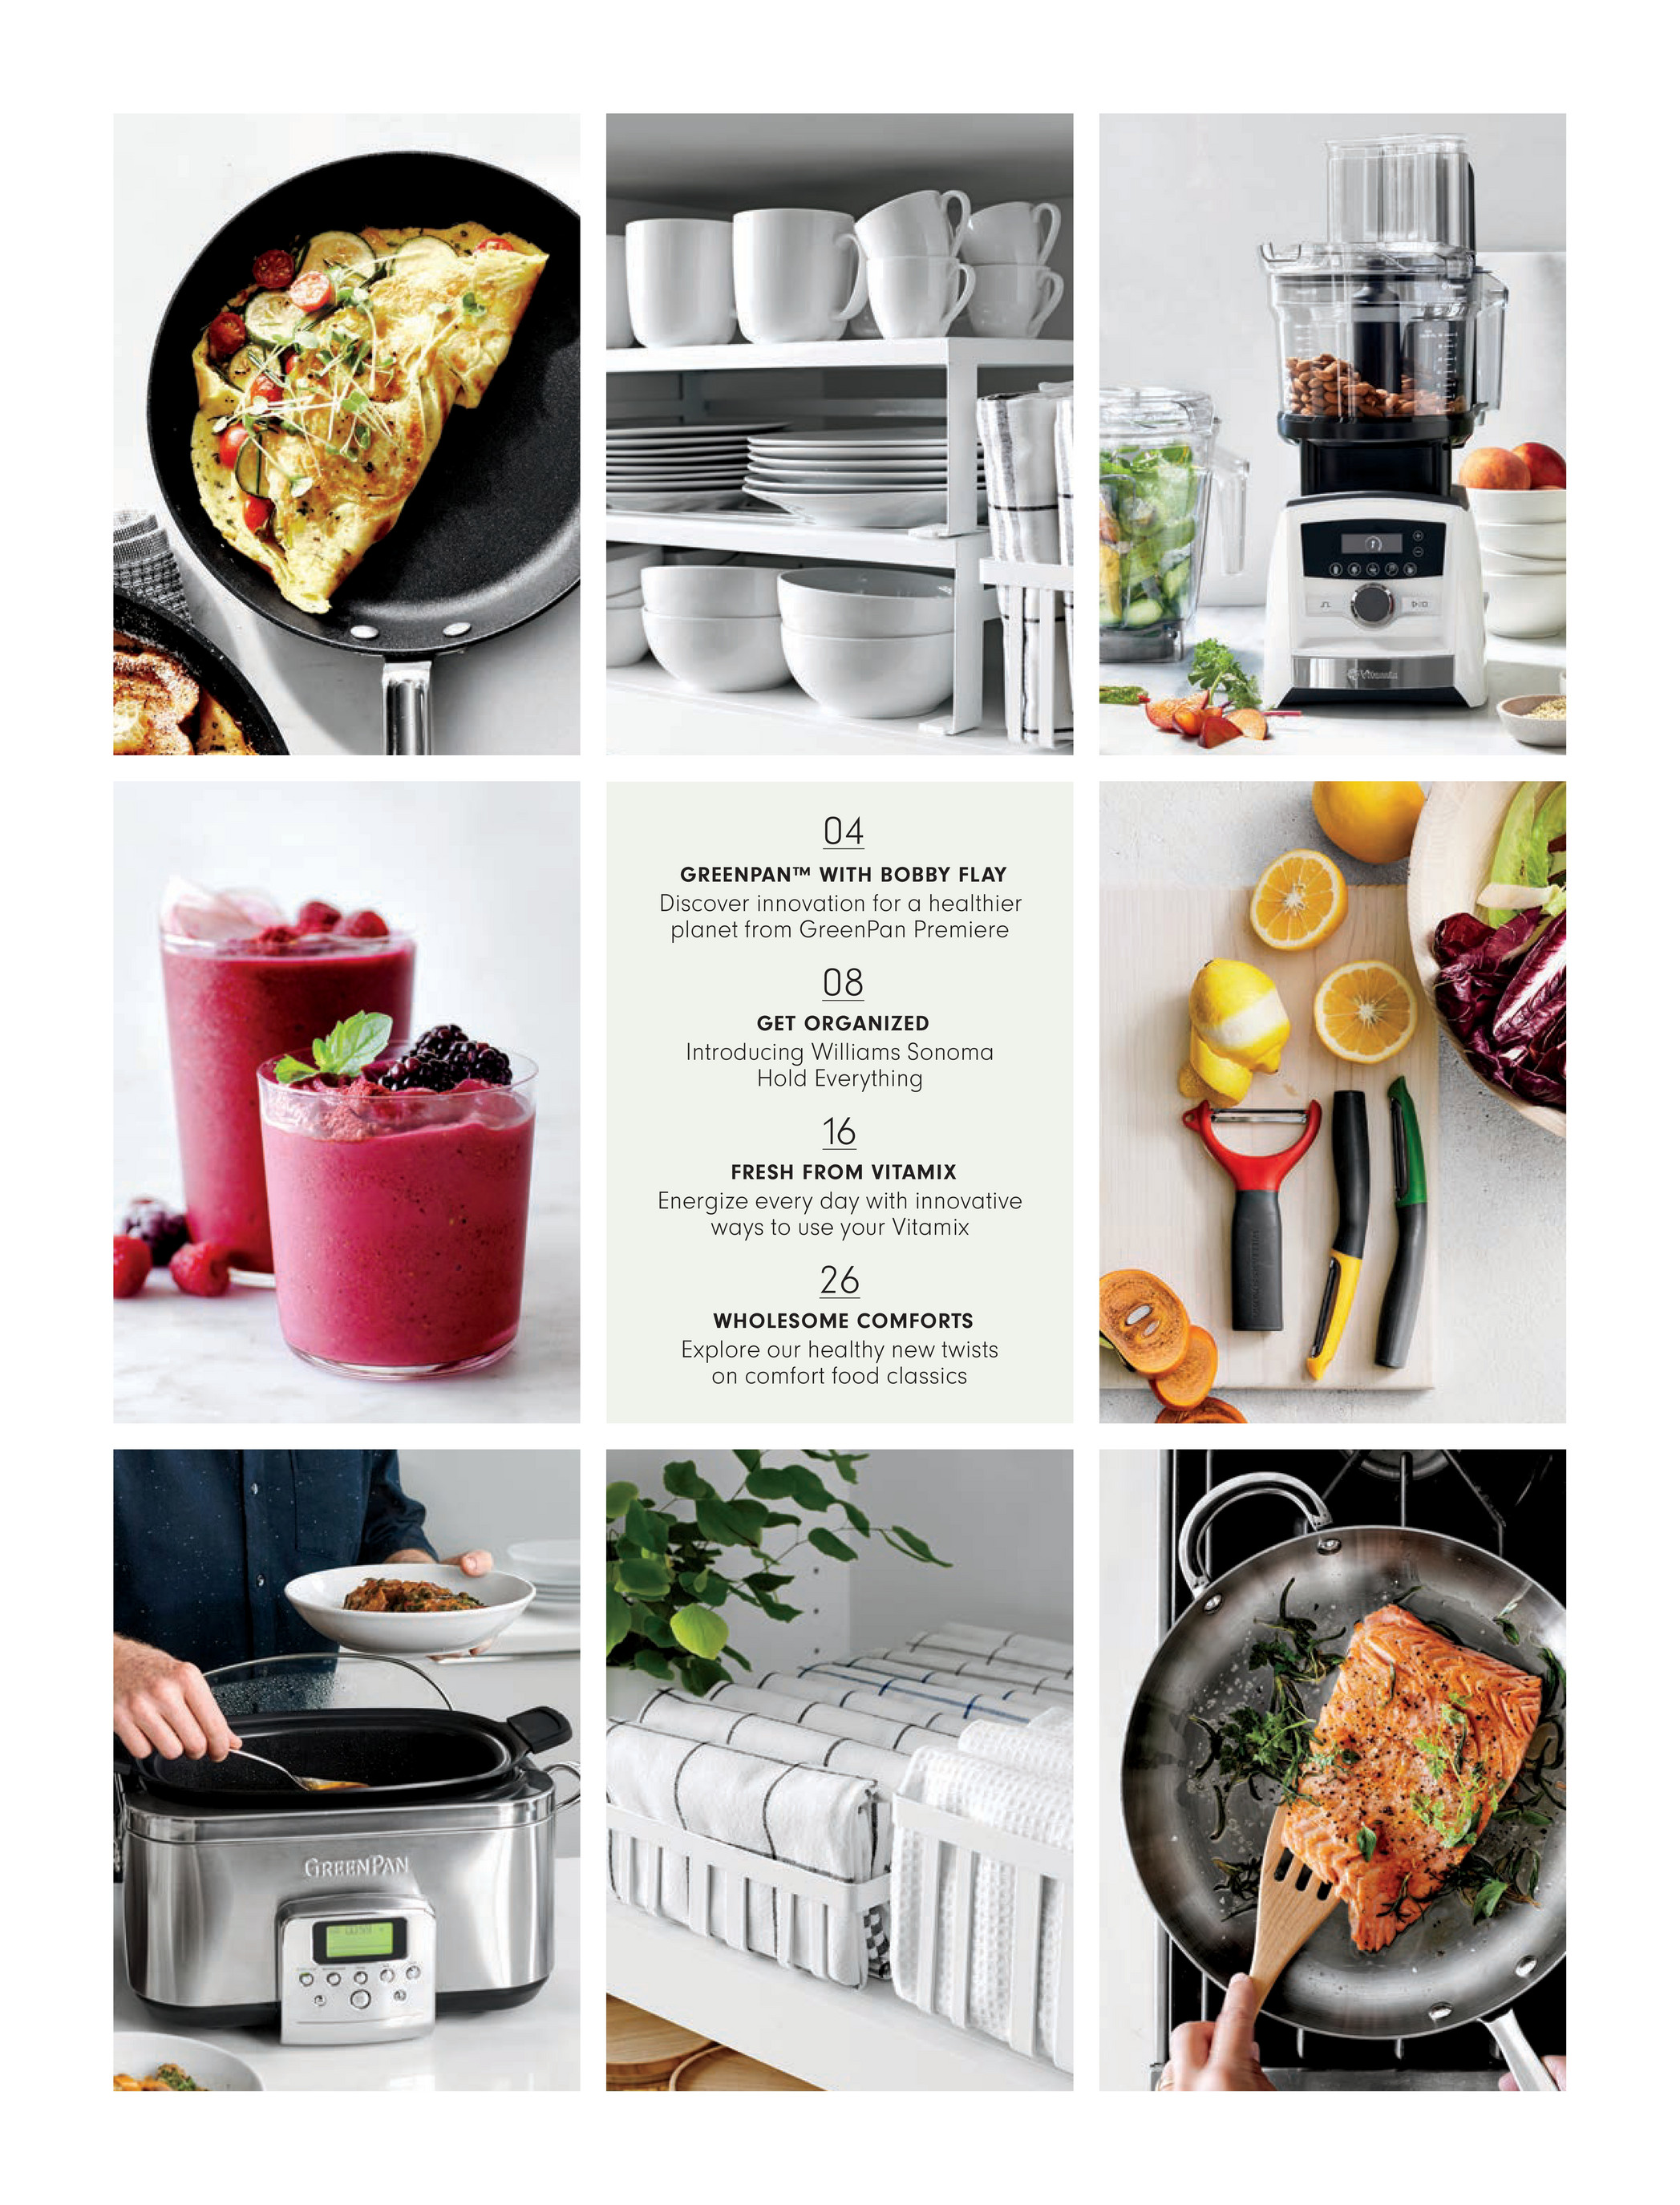 Williams-Sonoma: Chef Bobby Flay's new summer menu + his favorite cookware